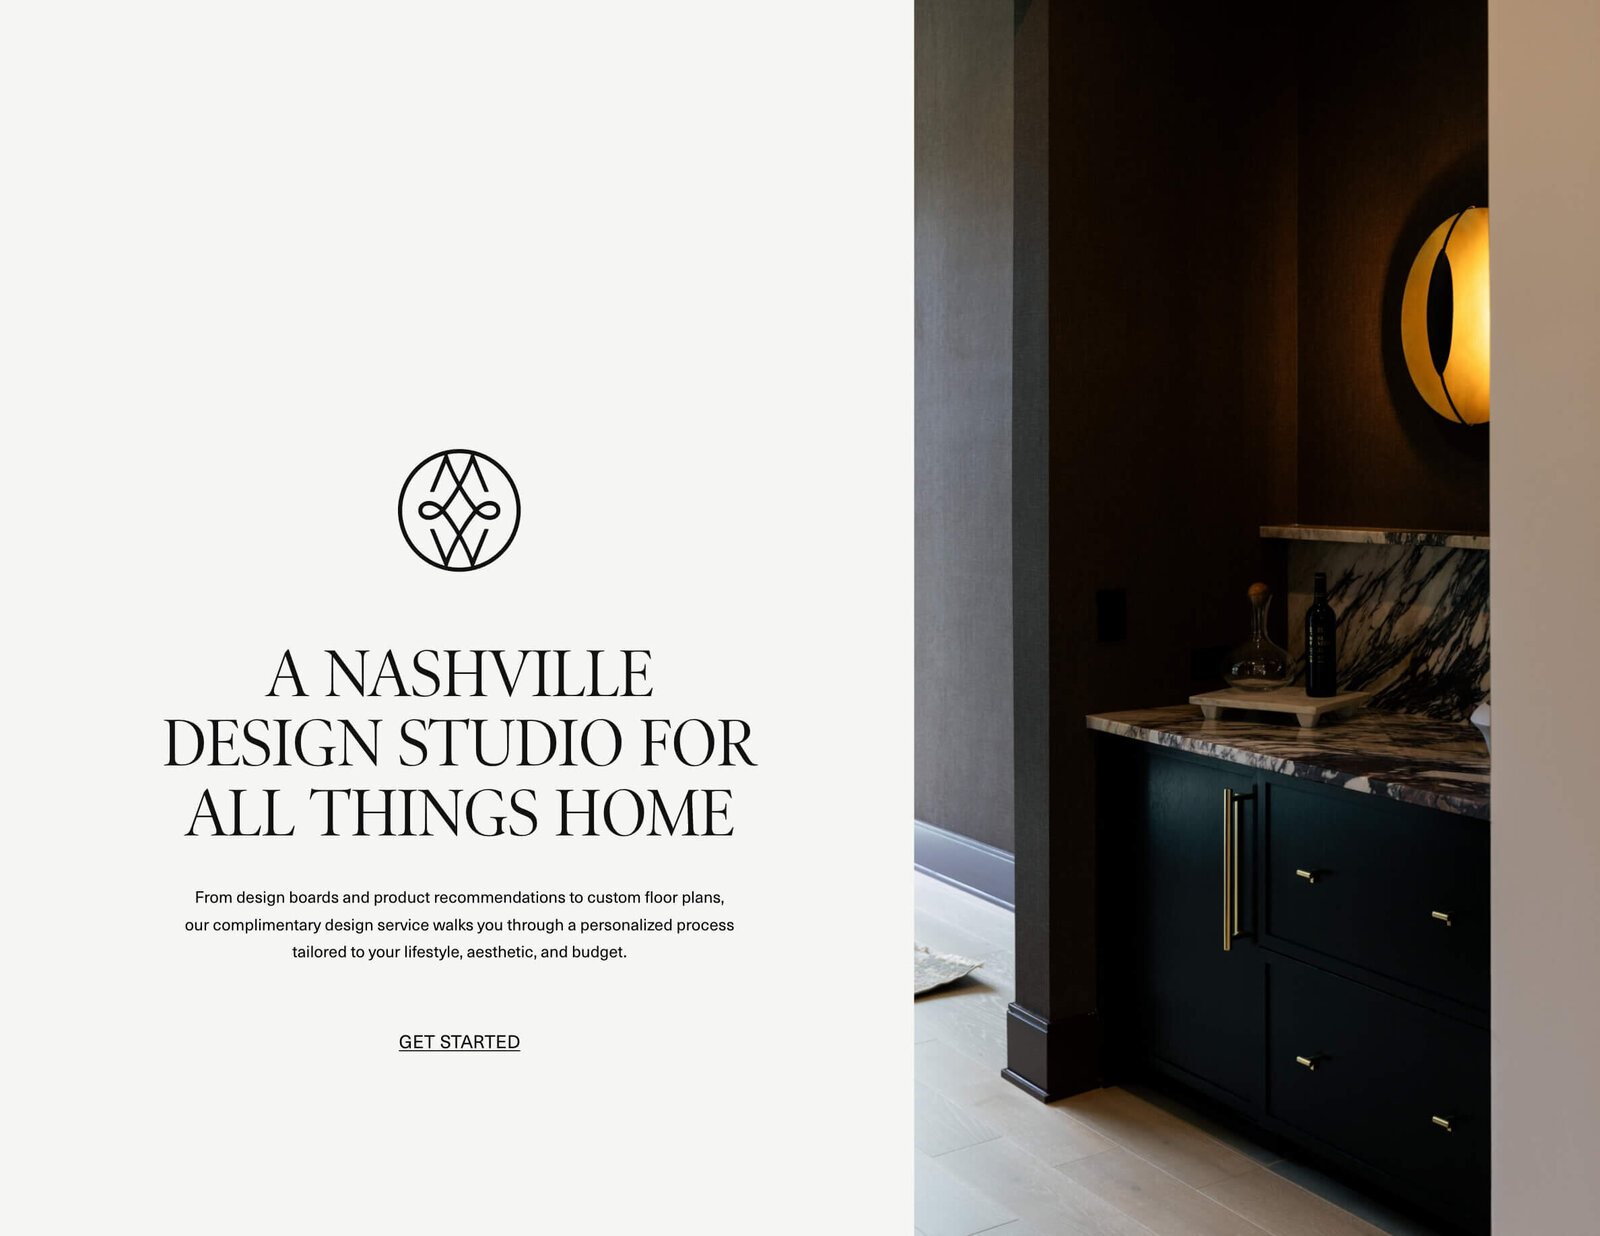 timeless-and-refined-branding-design-for-interior-retail-shop-by-letter-south-mayker concept – 54